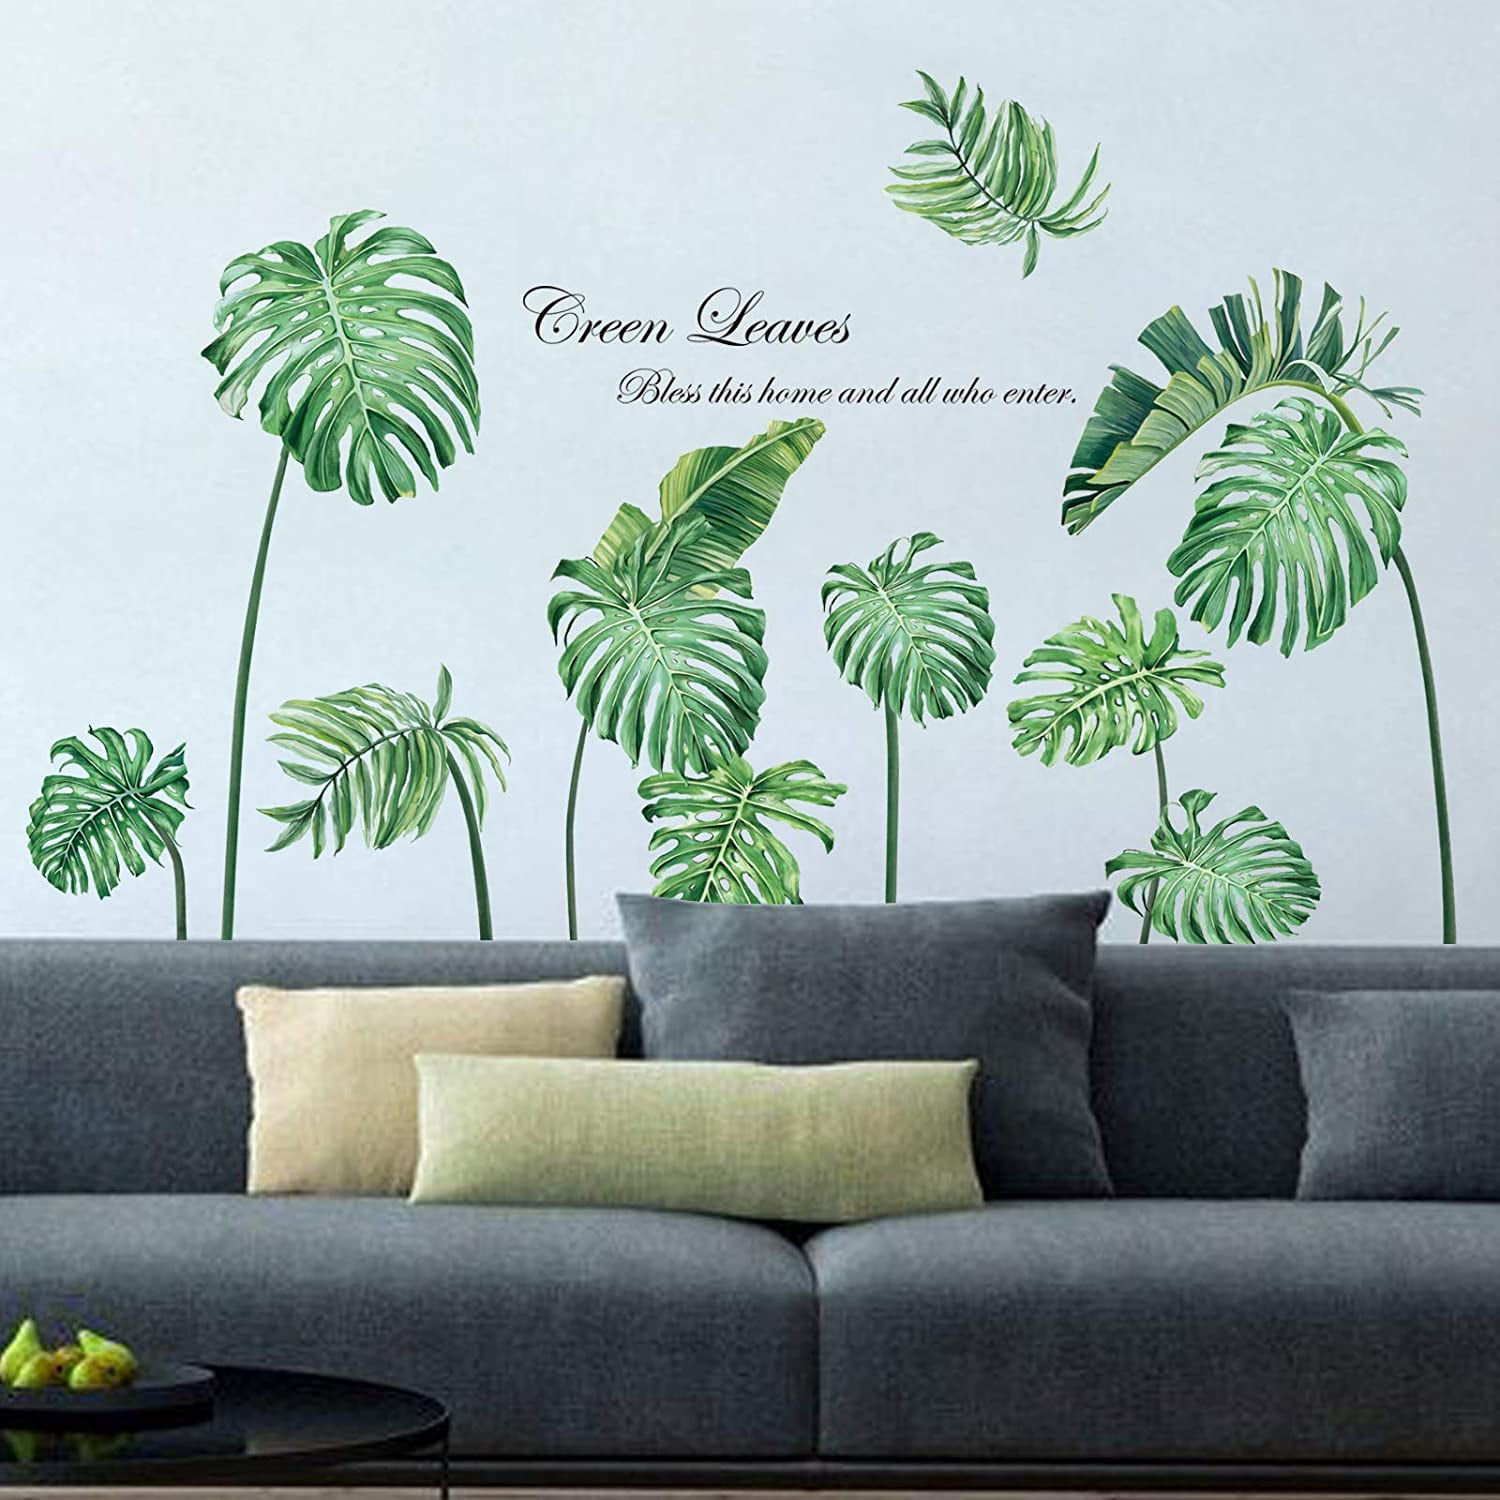 Decalmile-Time Wall Sticker with Quote and Letters, Living Room